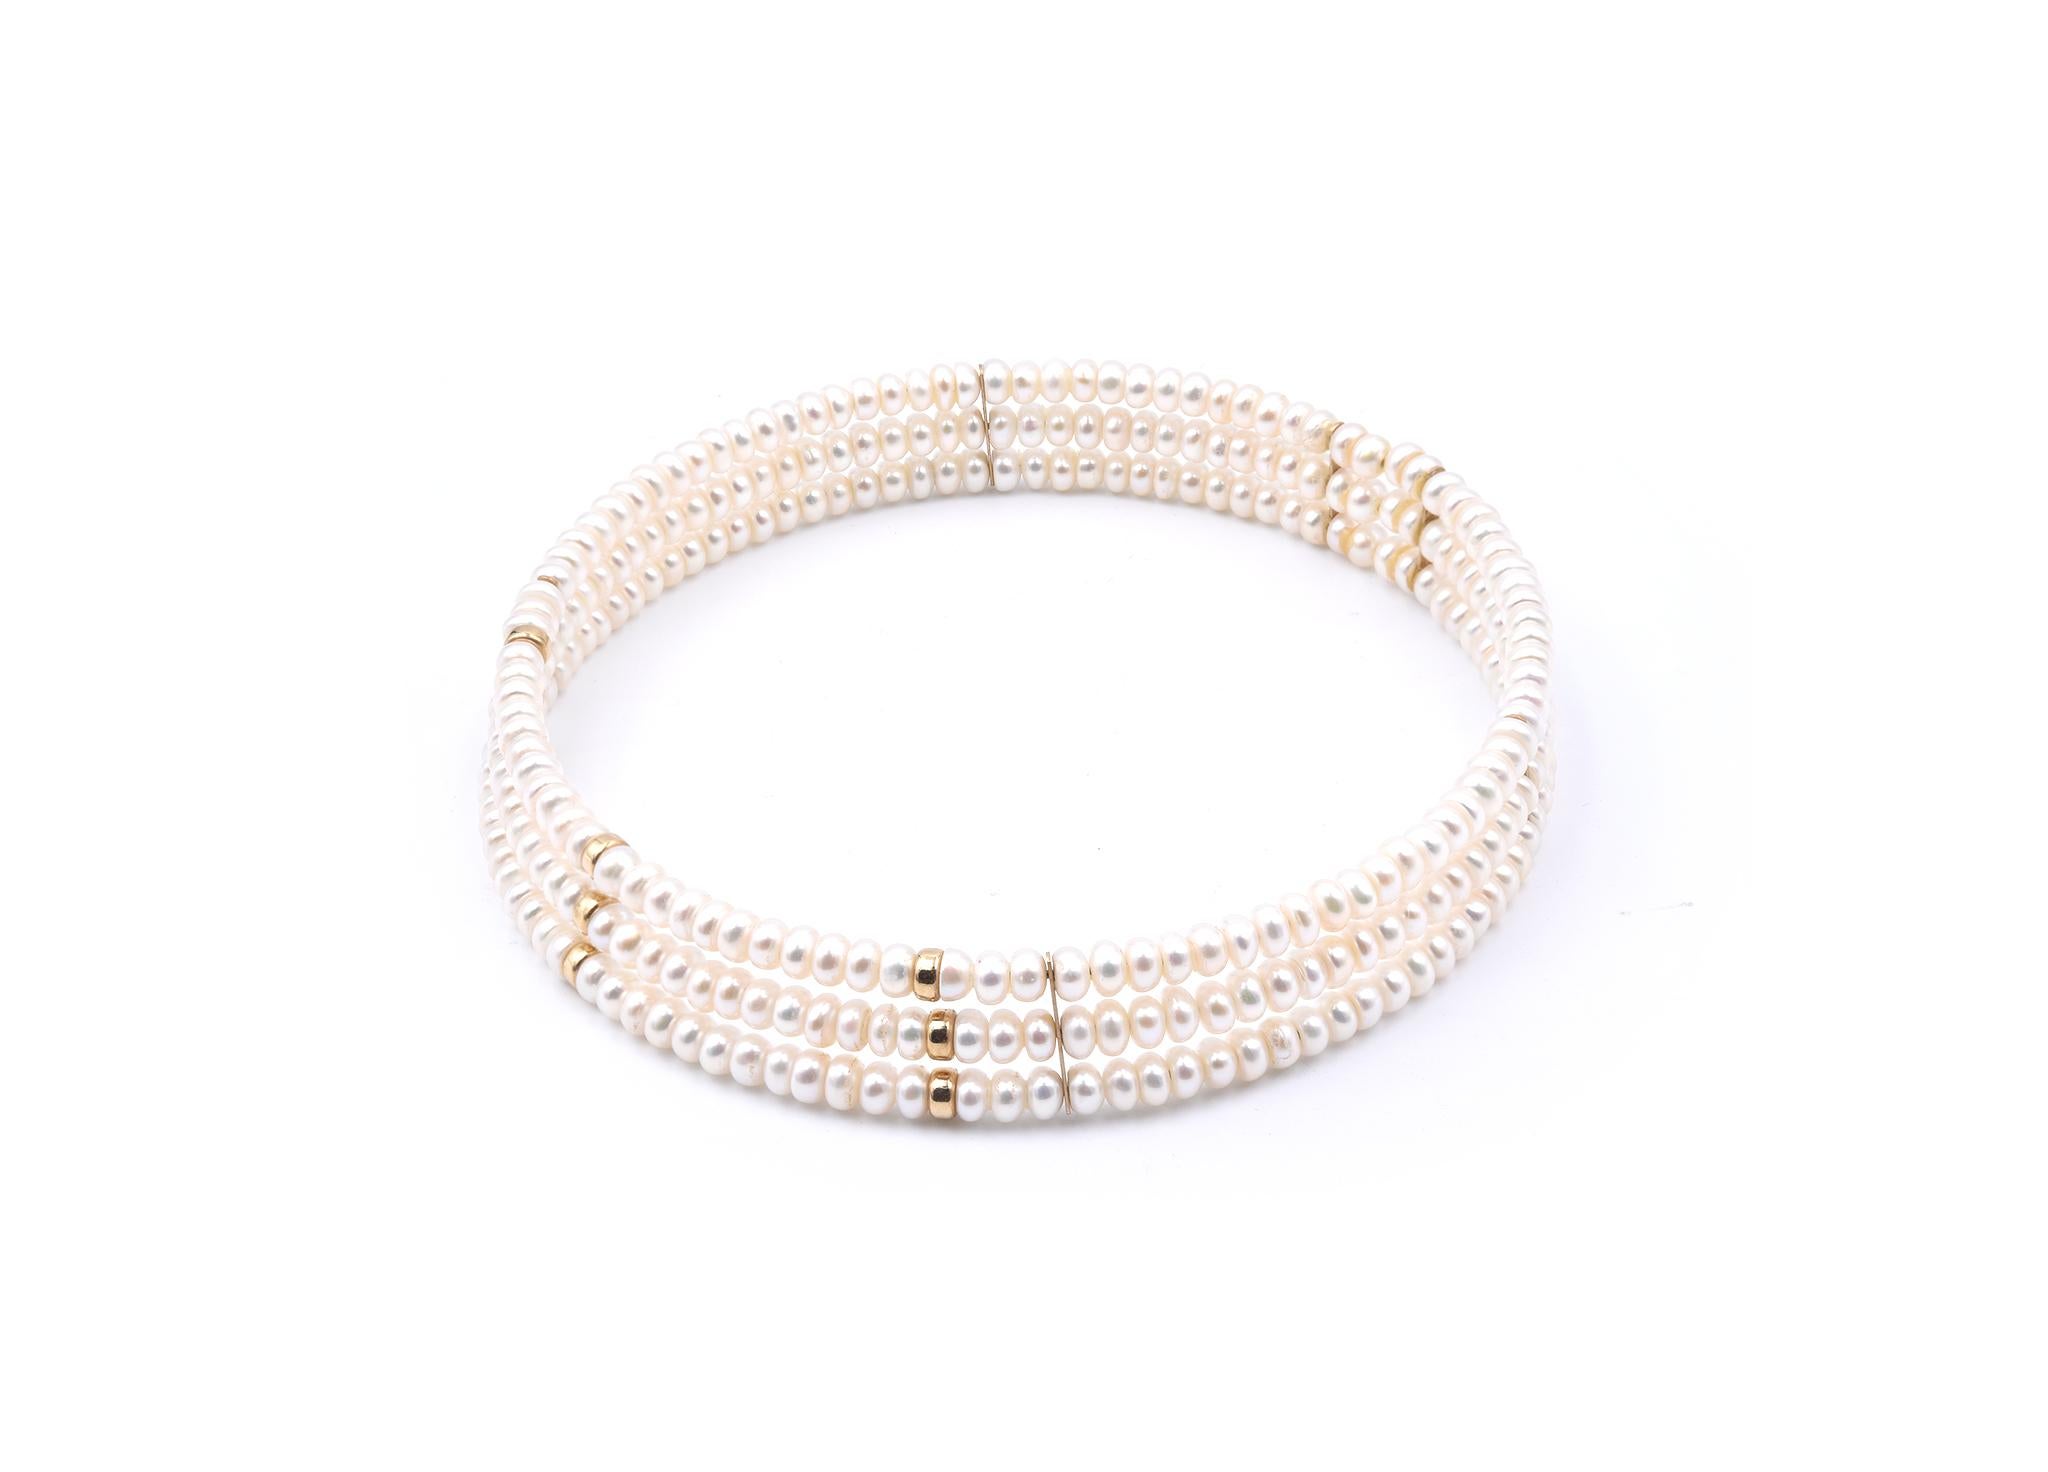 Designer: custom design
Material: 14k yellow gold
Dimensions: pearl necklace measures 12 inches in length
Weight: 47.42 grams